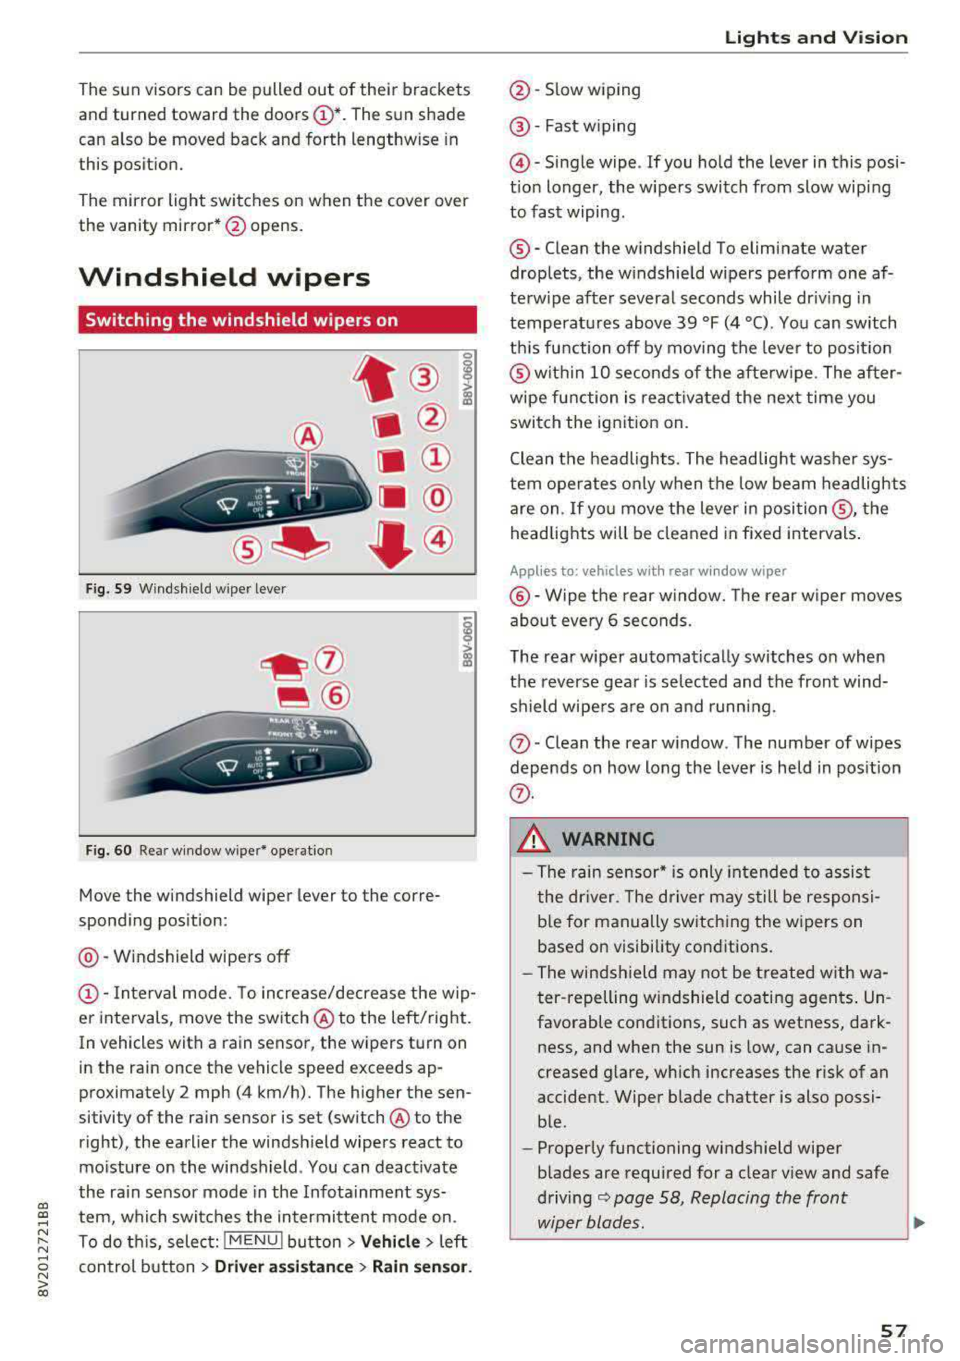 AUDI A3 SEDAN 2017  Owners Manual a,  a, ..... N 
" N ..... 0 N > 00 
The  sun  visors  can  be  pulled  out  of  their  brackets  
and  turned  toward  the  doors 
(D *. The  sun  shade 
can  also  be  moved  back  and  forth  length